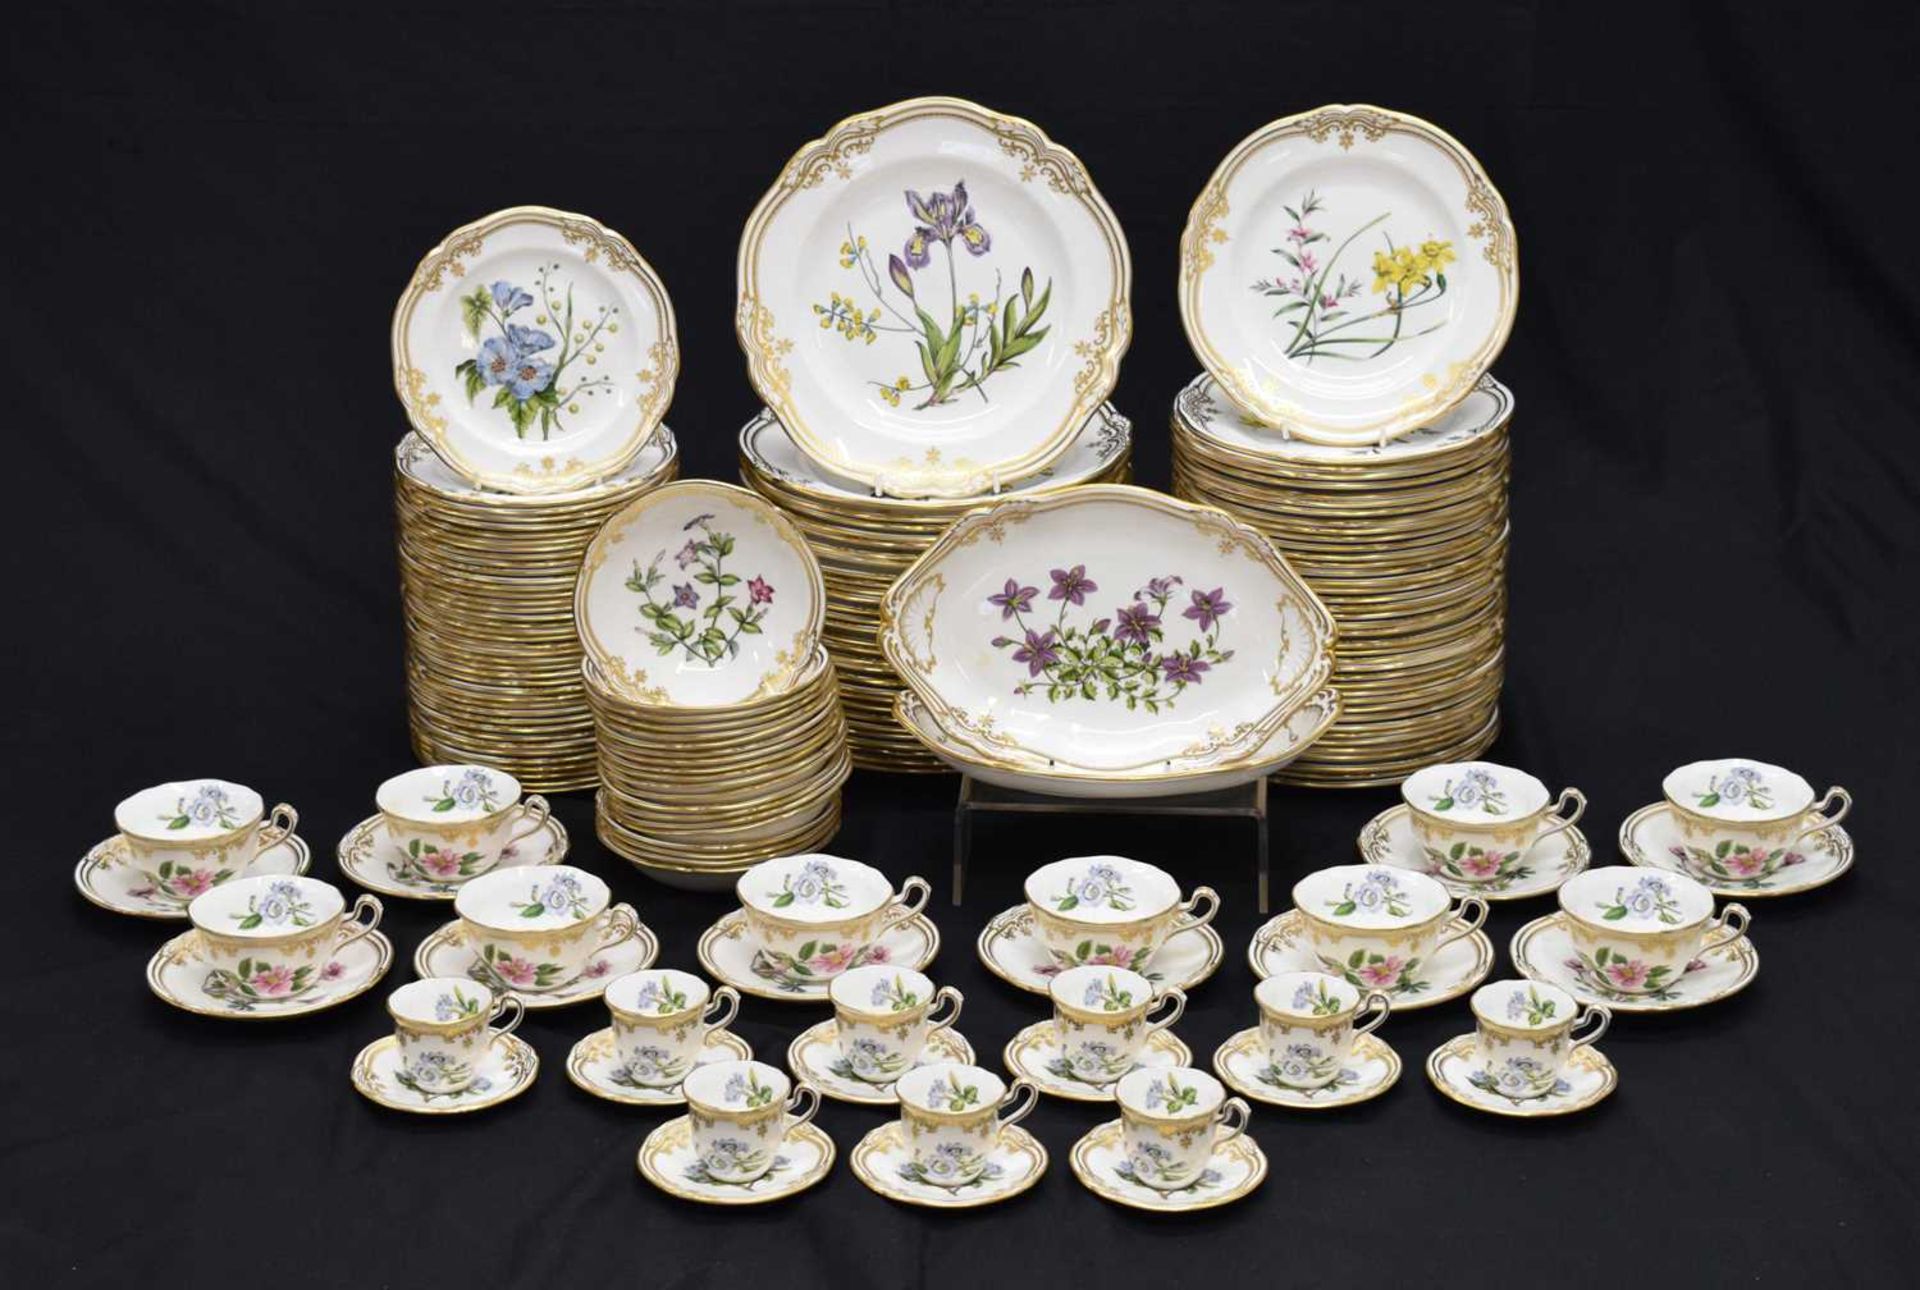 Extensive collection of Spode ‘Stafford Flowers’ dinner and tea wares